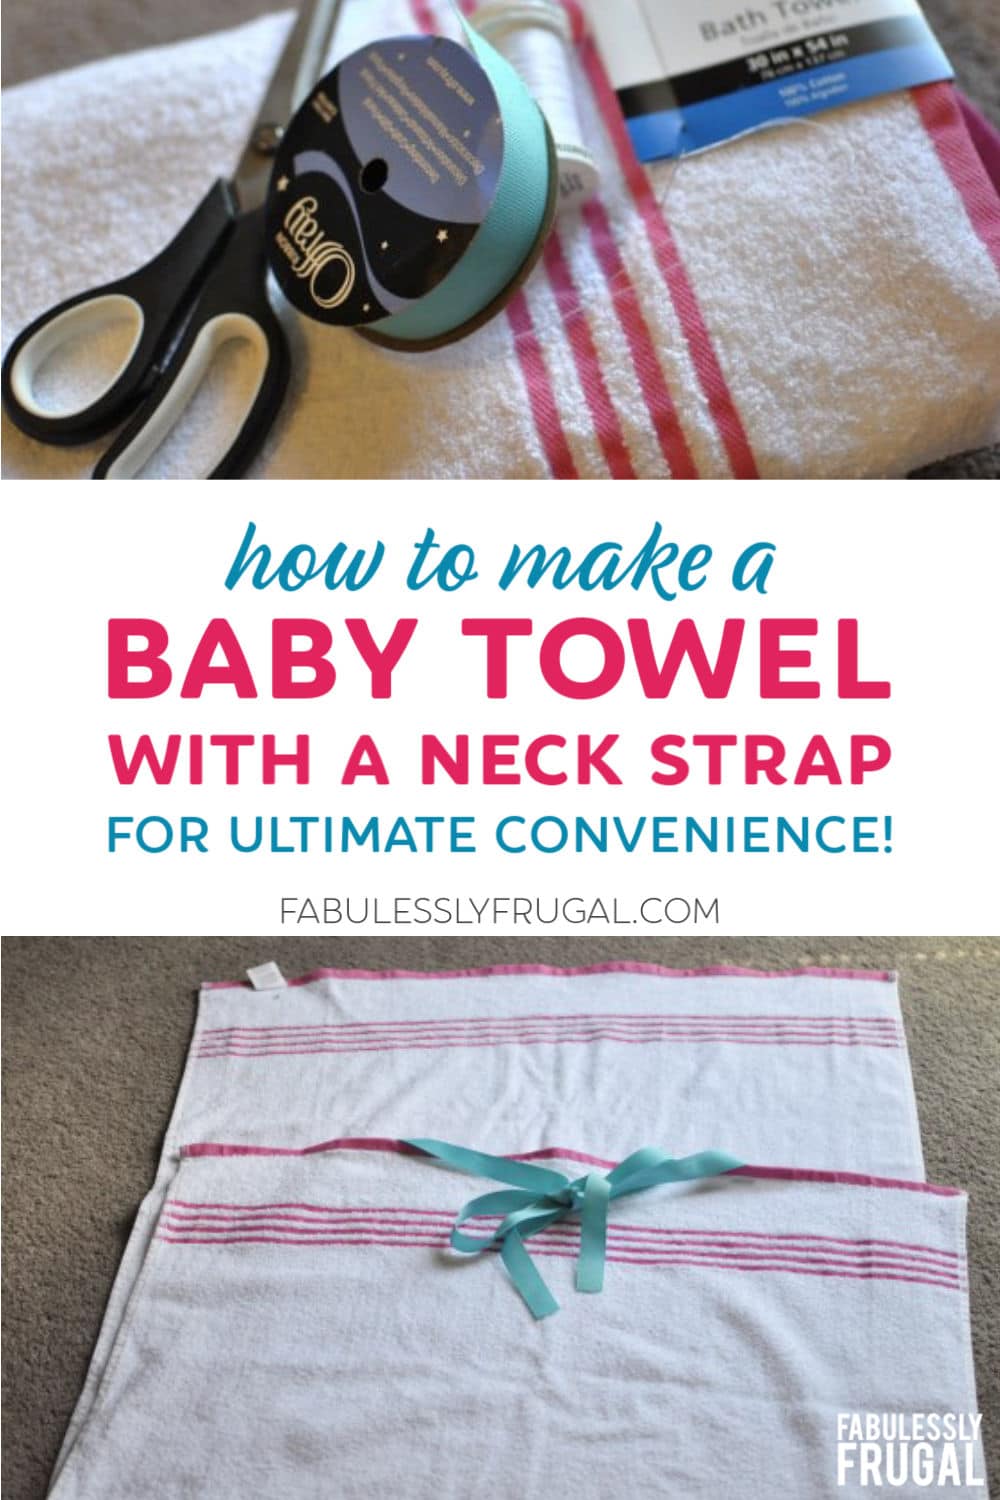 How to make a baby towel